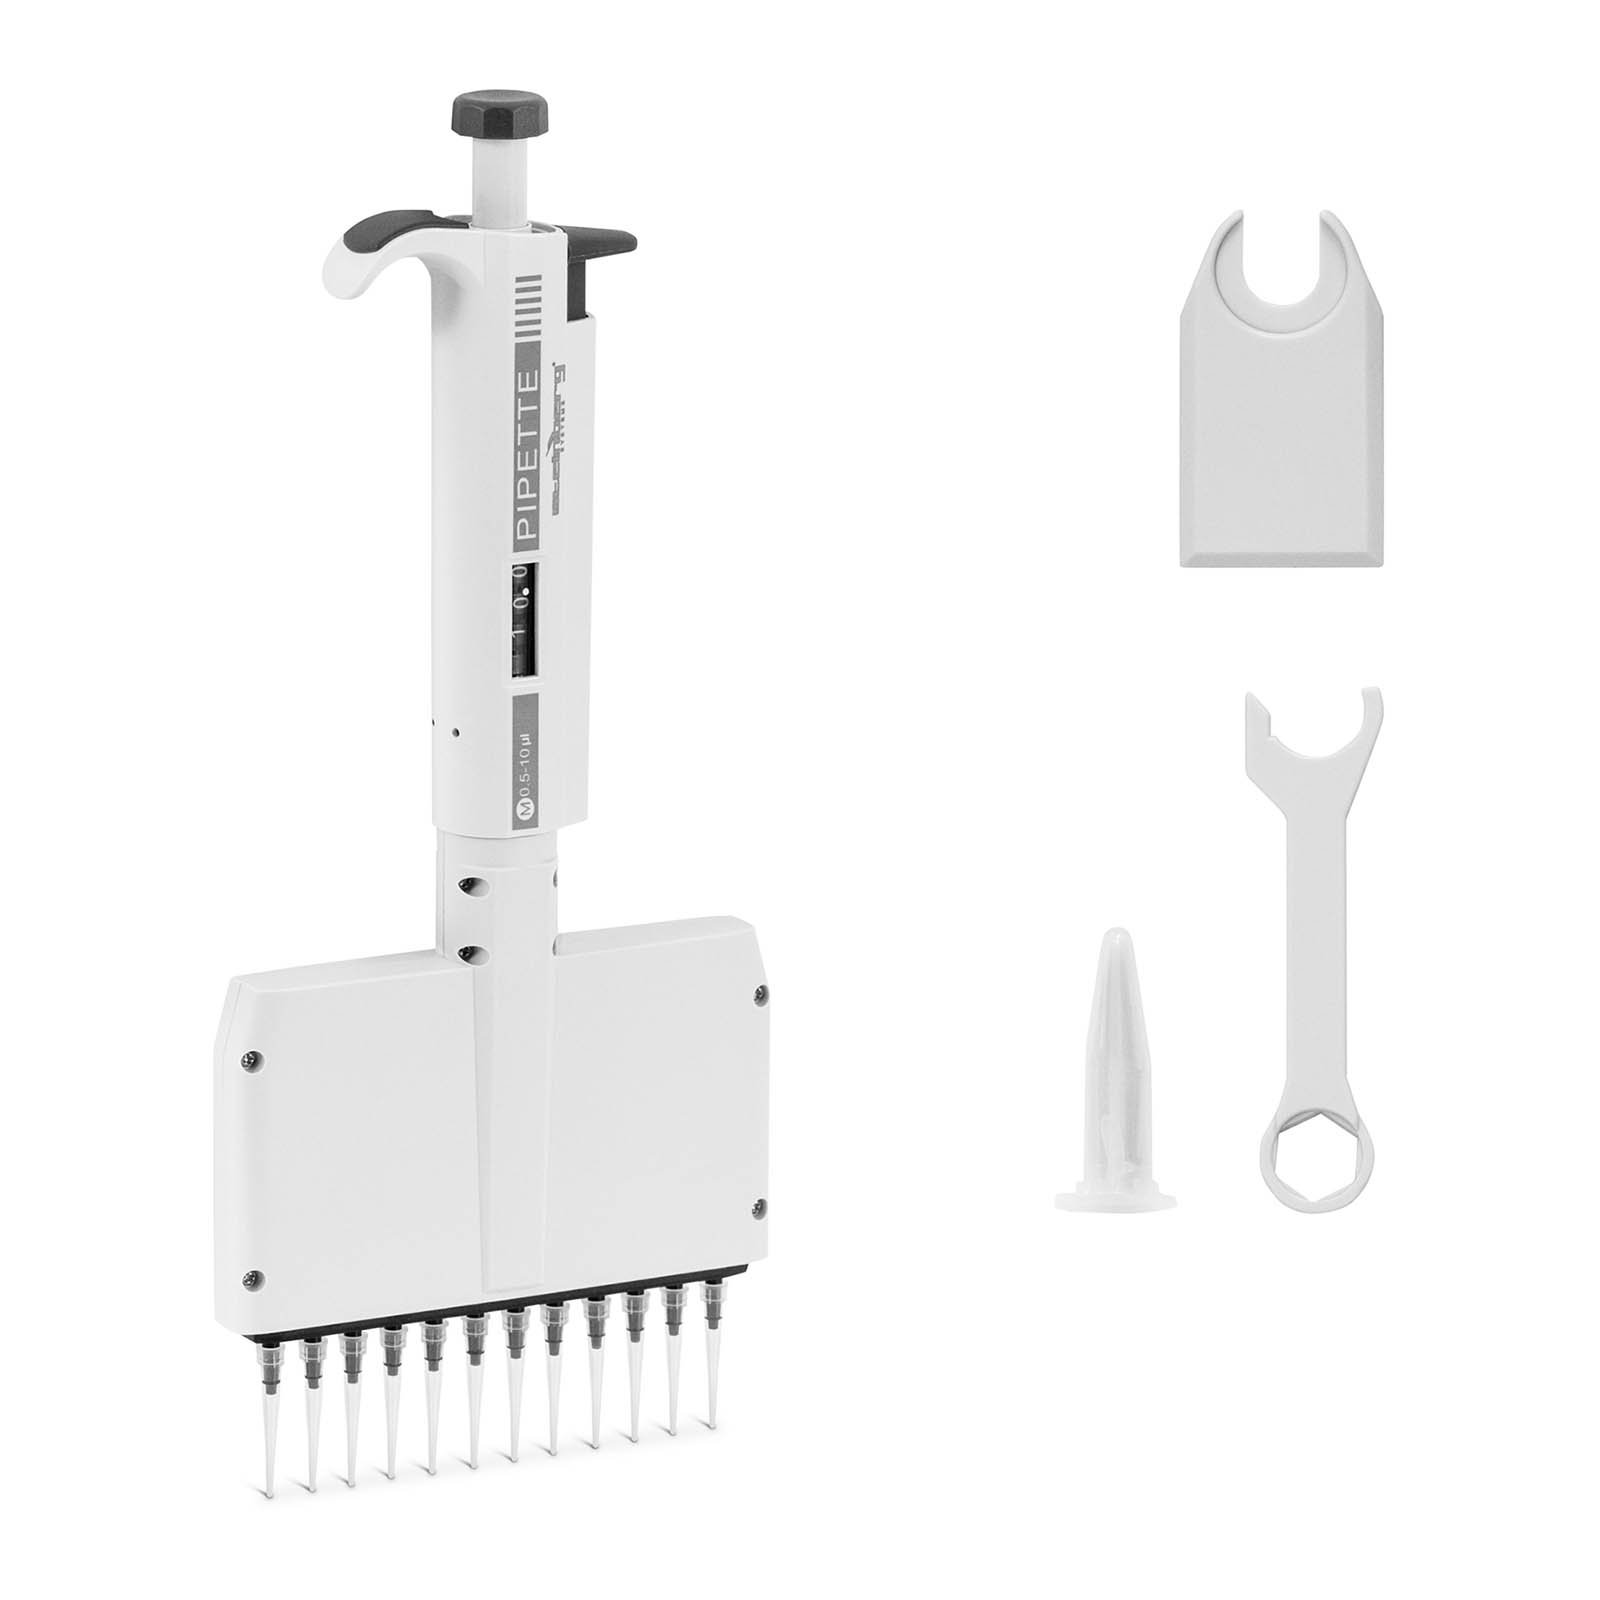 Multichannel pipette - for 12 tips - 0.0005 - 0.01 ml